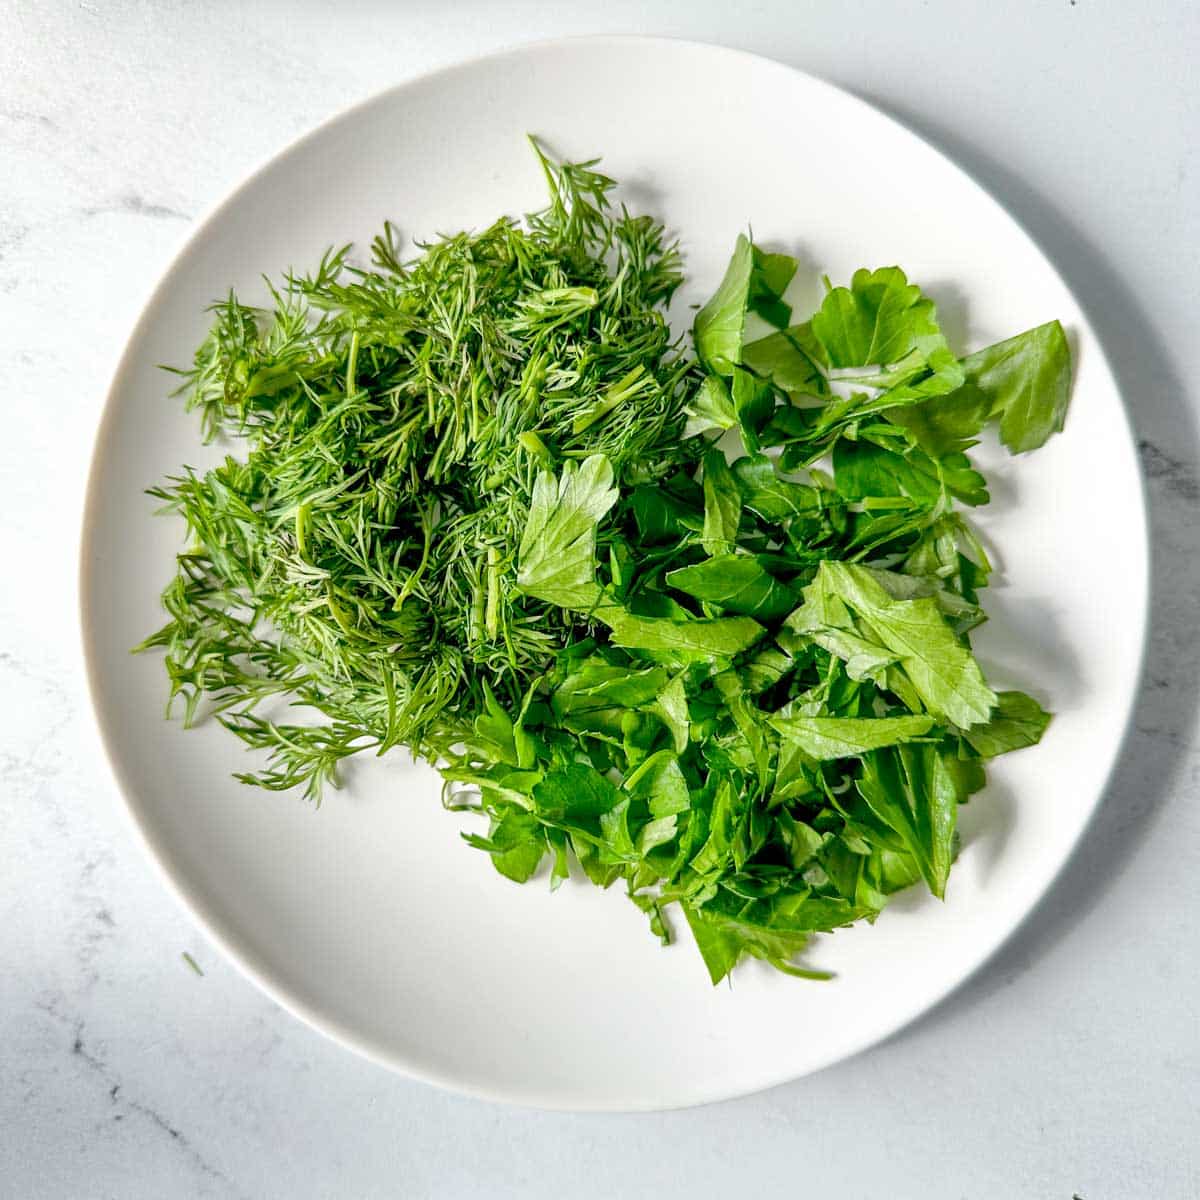 dill and parsley on a white plate/